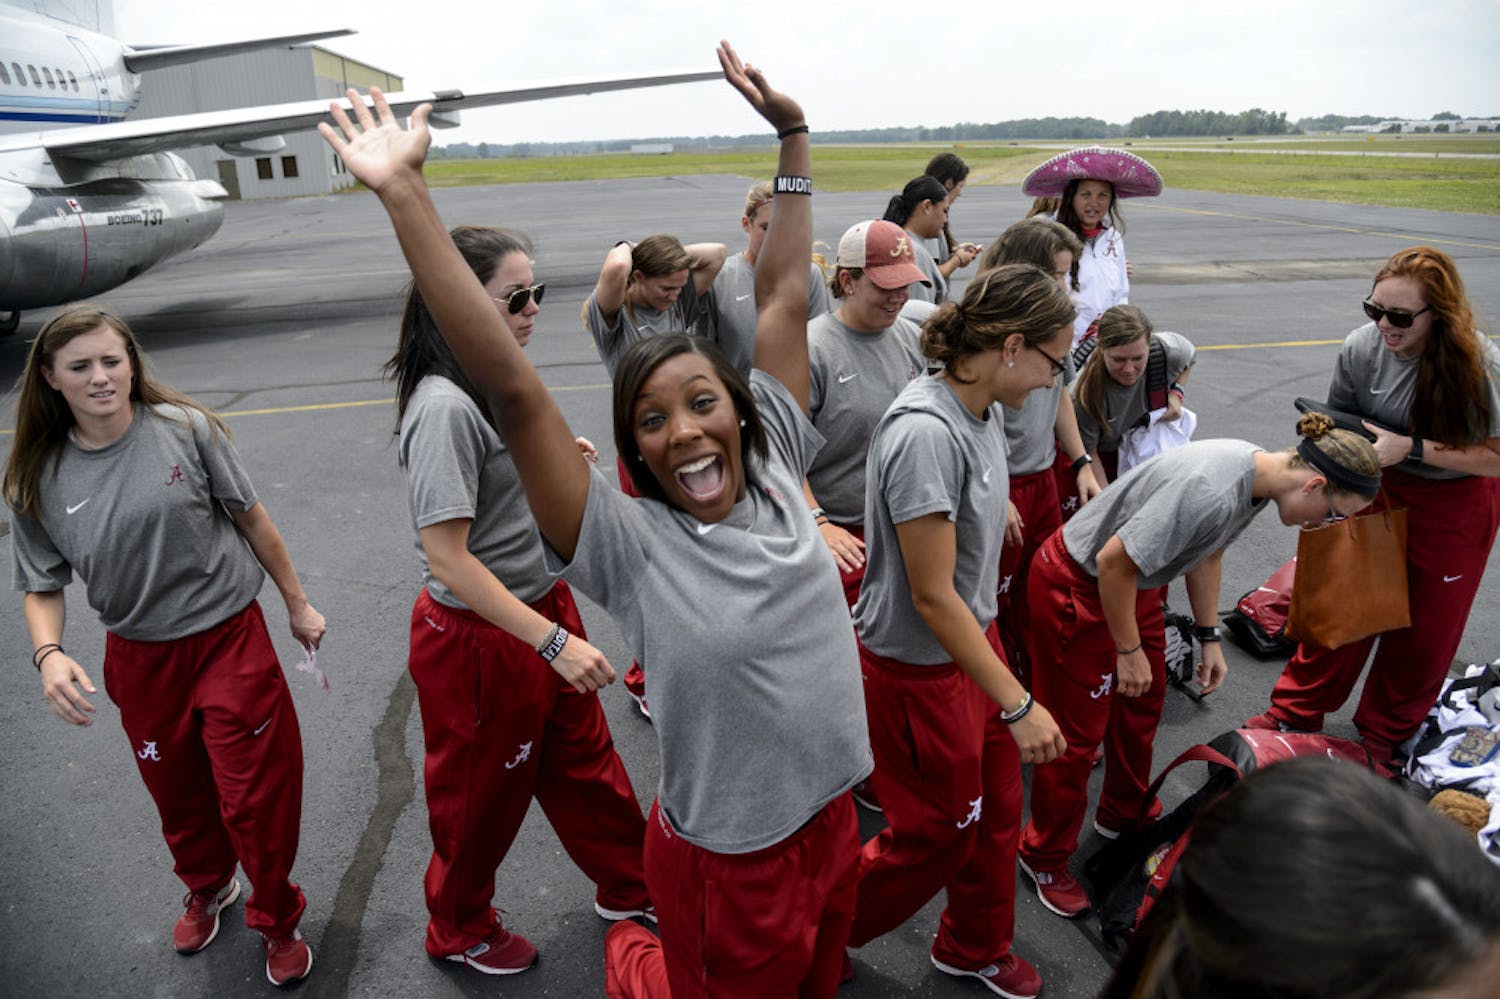 Alabama outfielder Andrea Hawkins cheers as the softball team gathers its bags before boarding a flight to Oklahoma City for the NCAA Women's College World Series on Tuesday in Tuscaloosa, Ala.